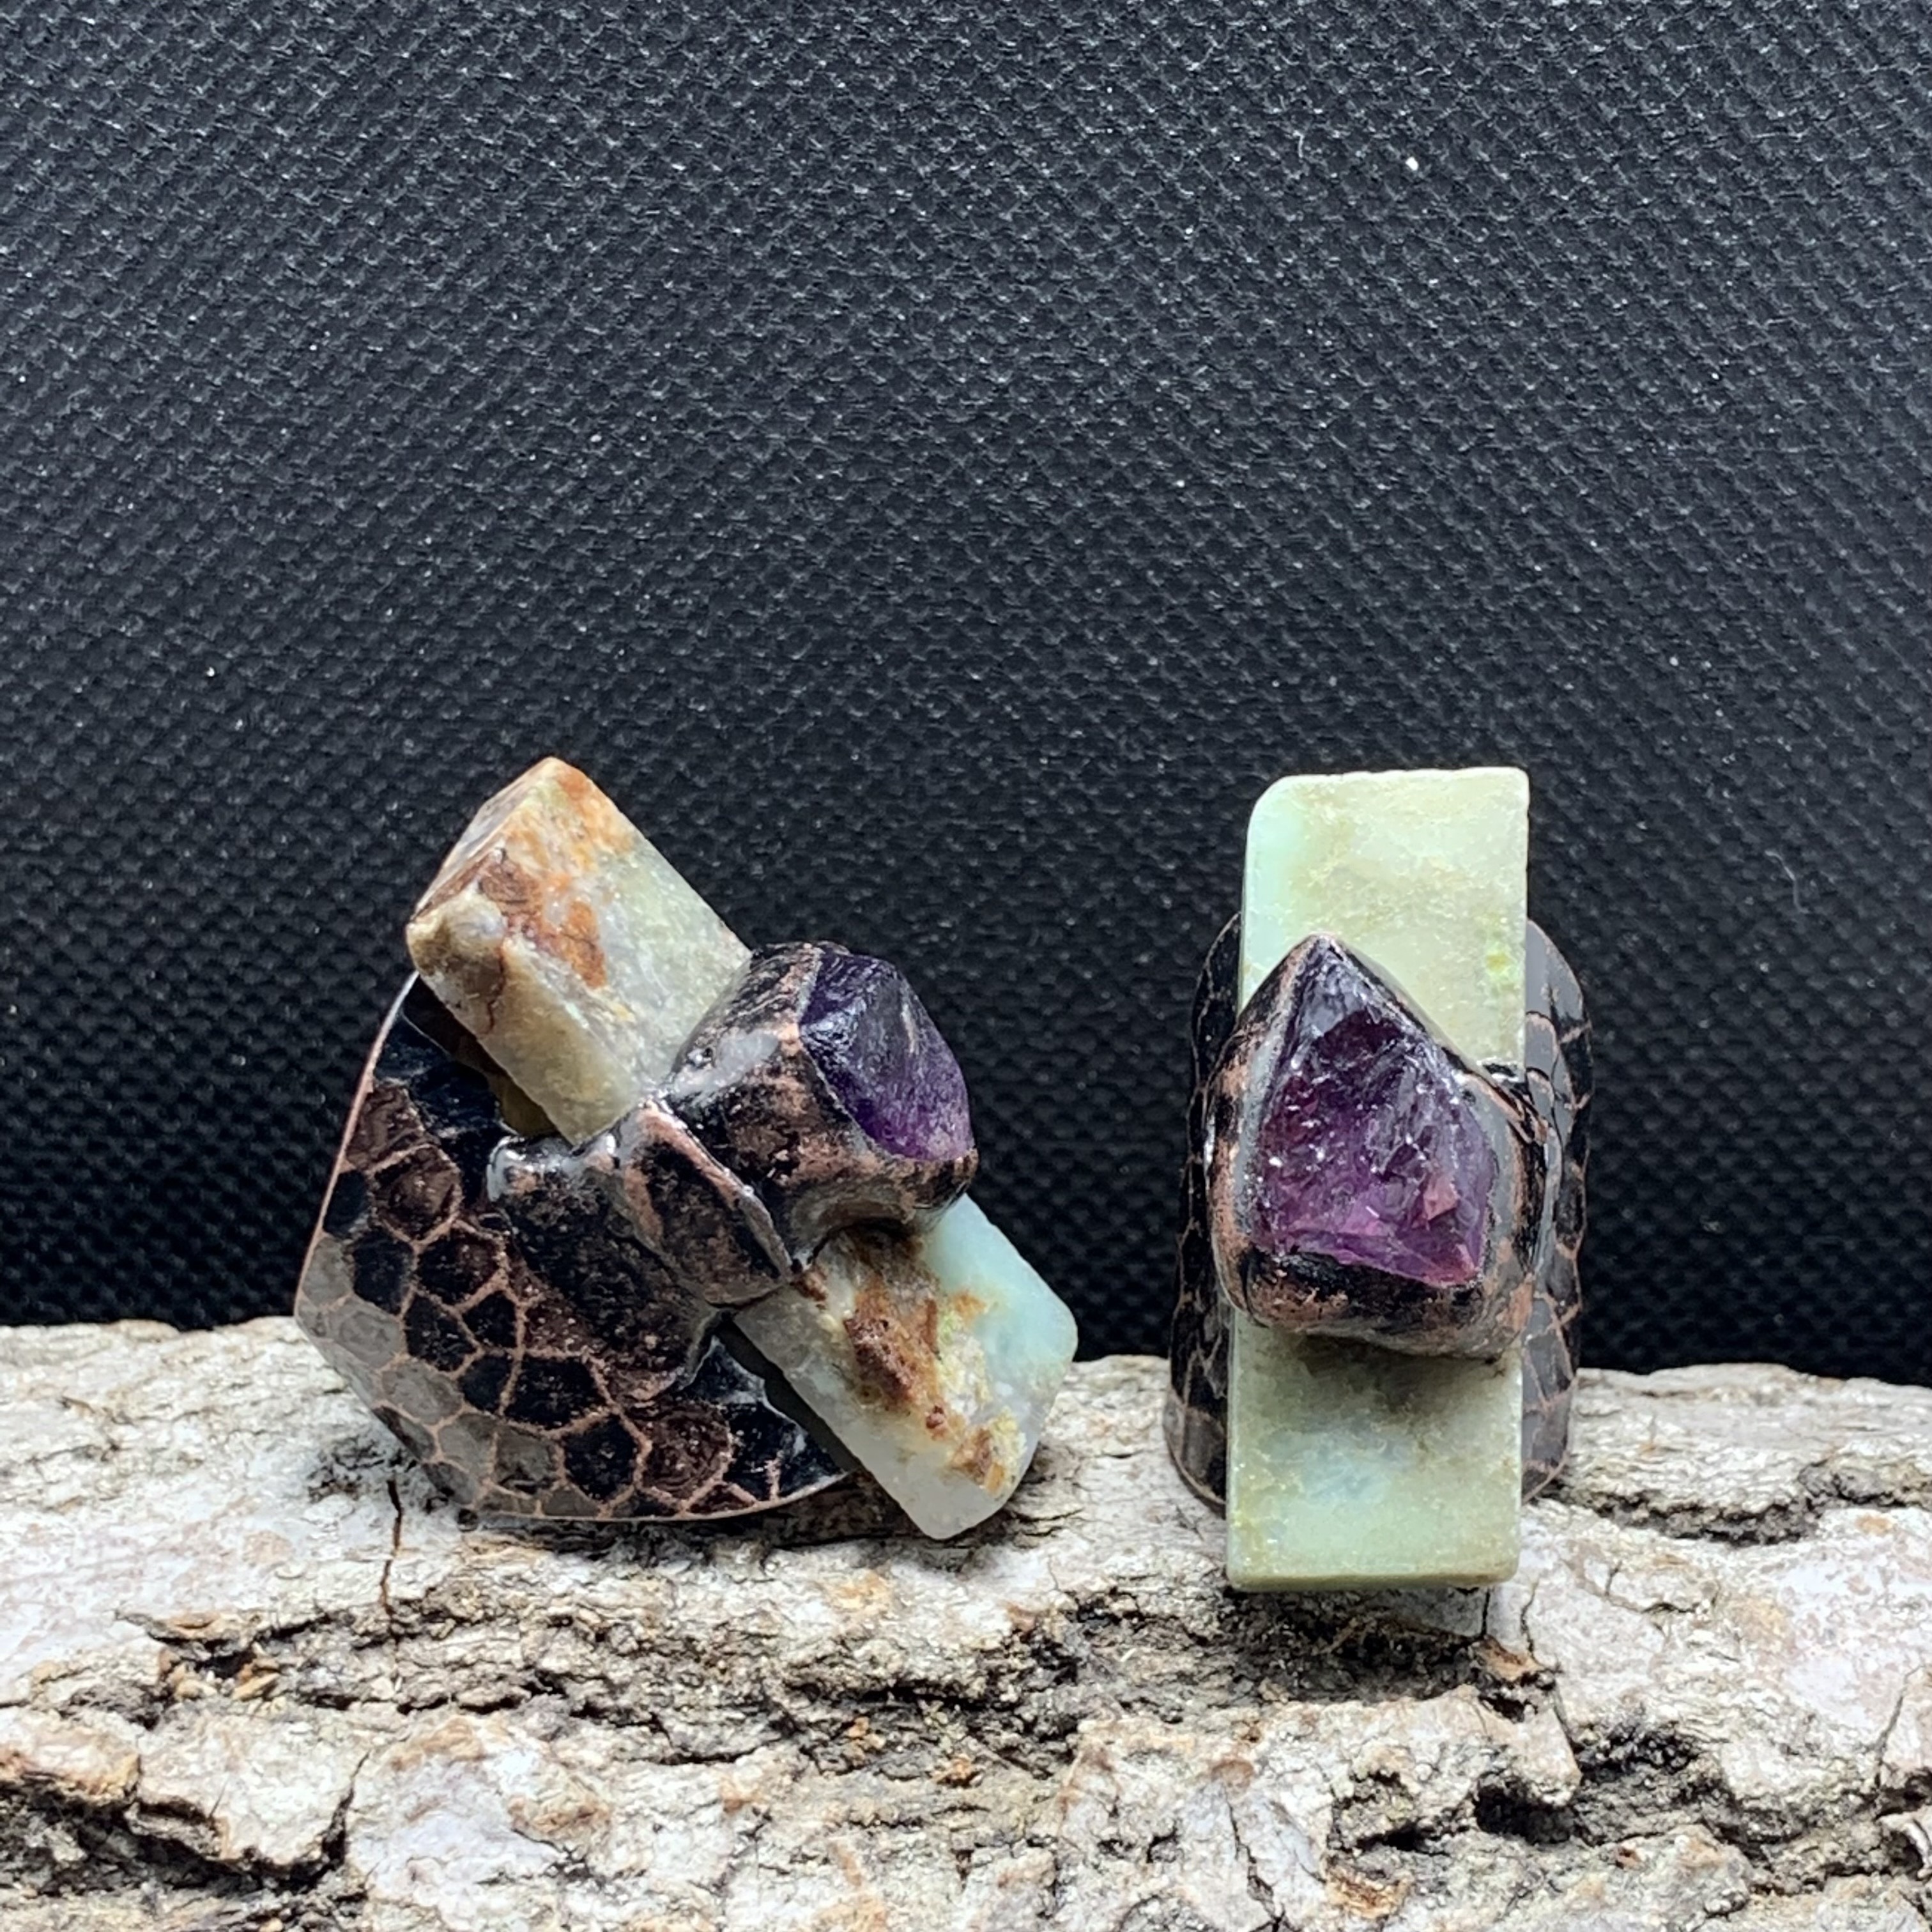 

Vintage-inspired Adjustable Ring With Natural Australian Jade & Amethyst - Handcrafted, Antique Bronze Finish, Perfect For Parties & Everyday Wear